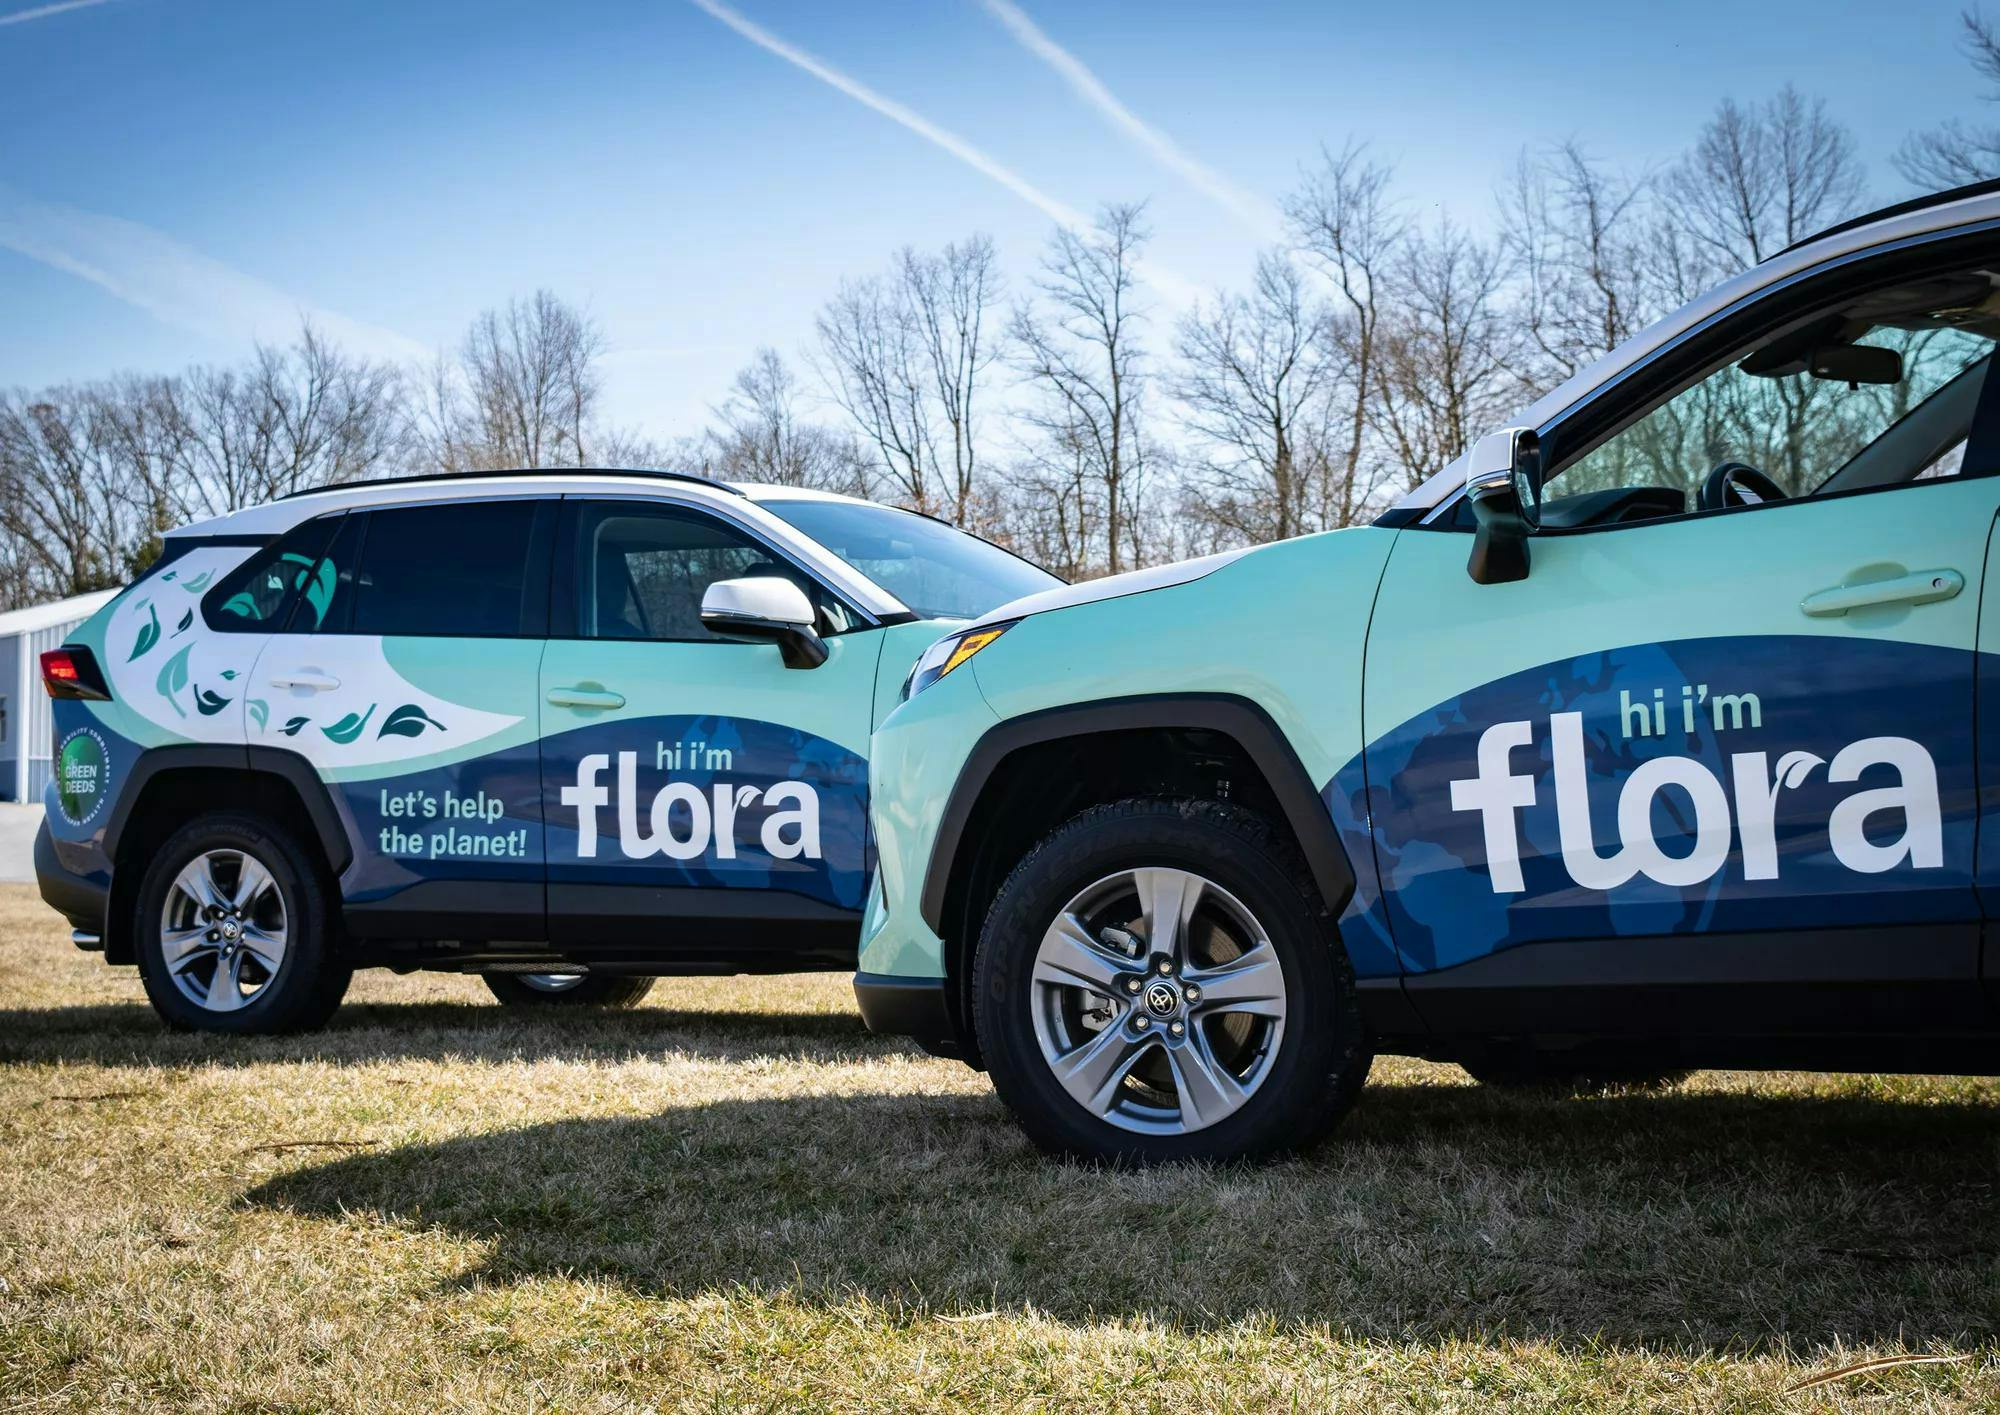 Photos of two TOYOTA RAV 4 vehicles wrapped for our sustainability initiative. The vehicle is named FLORA